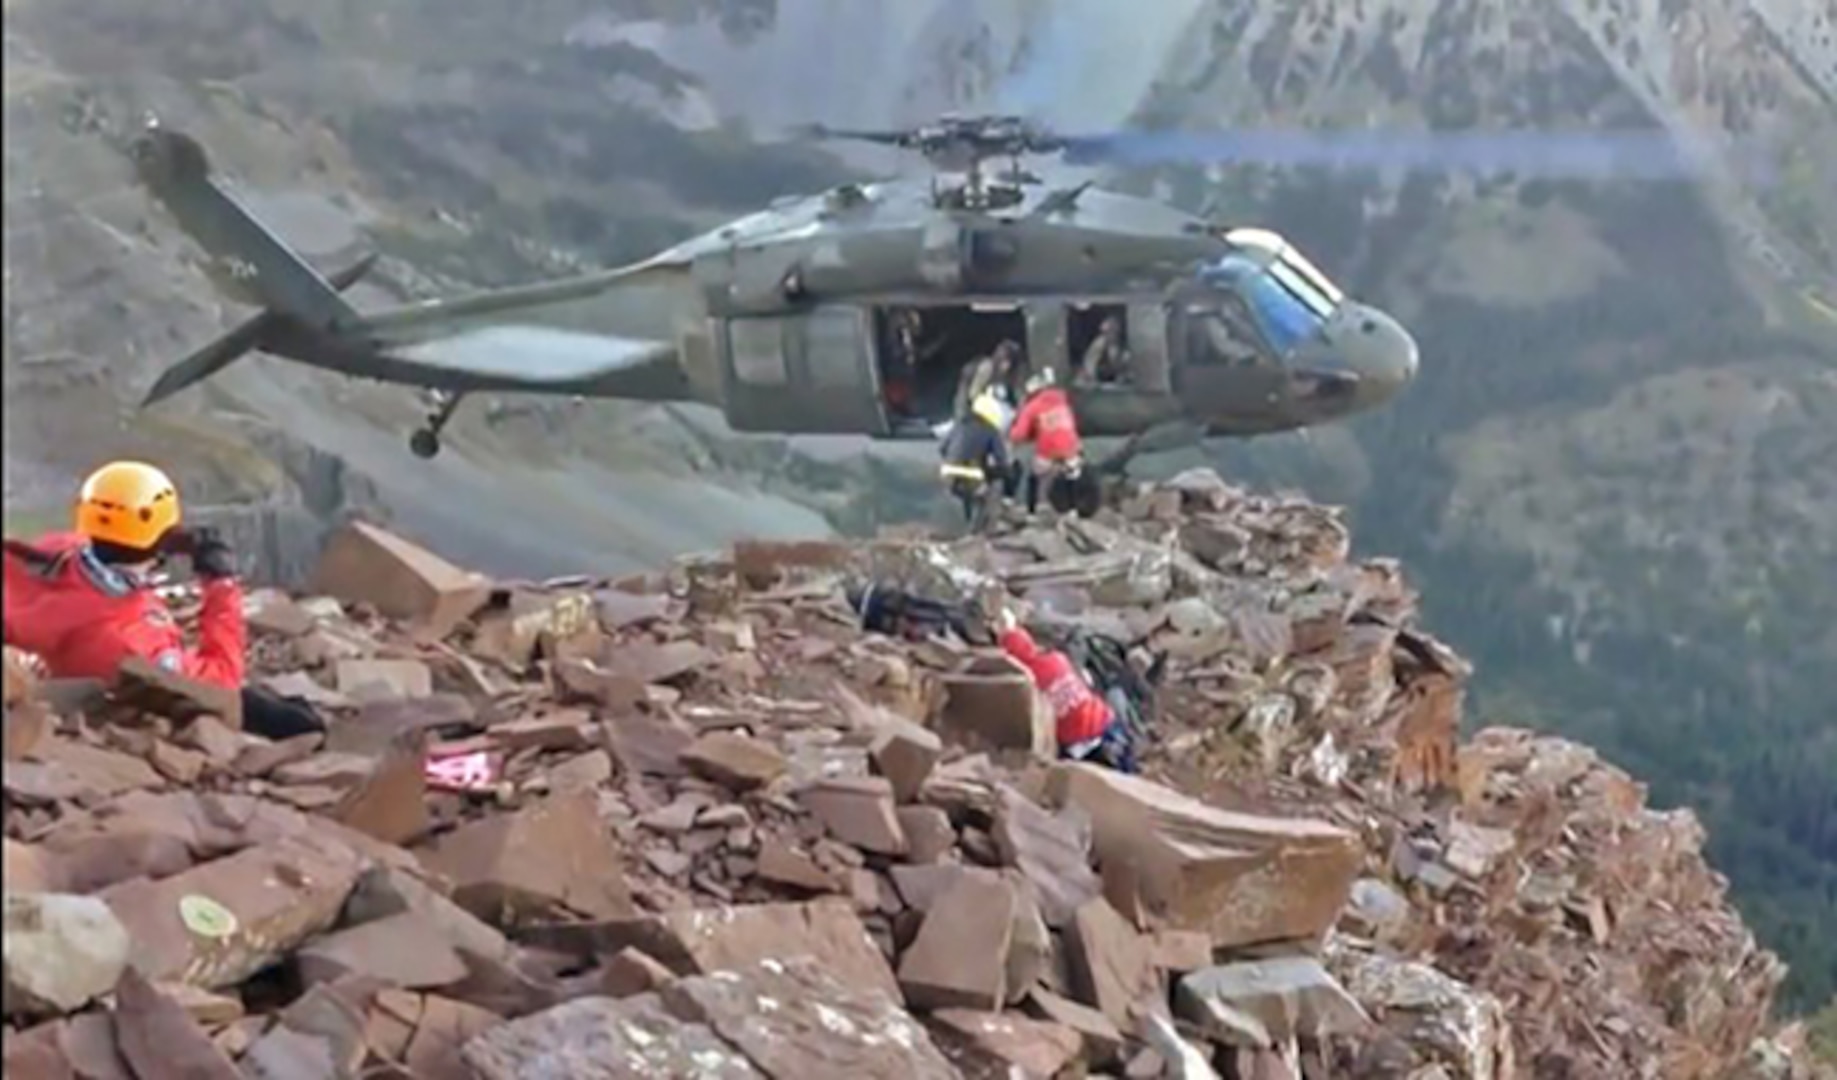 In this video still image, a UH-60 Black Hawk crew from the Colorado National Guard's High-Altitude Army National Guard Aviation Training Site perform a one-wheeled landing at or above 13,000 feet to rescue an injured hiker from Maroon Bells, Sept. 21, 2013.